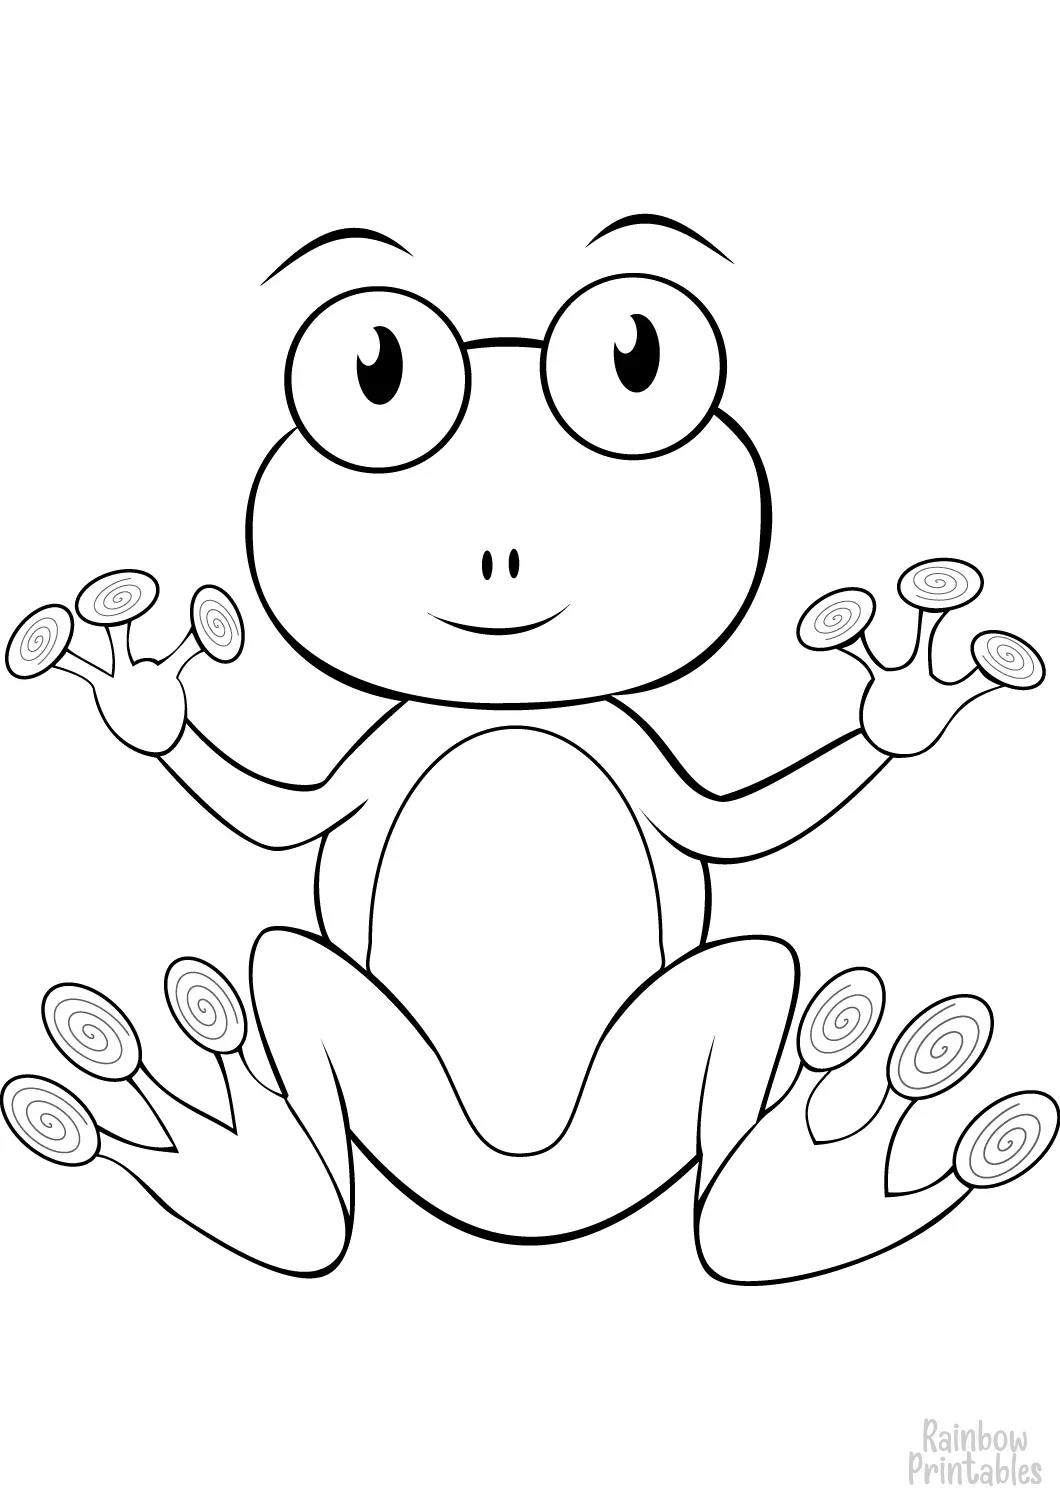 SIMPLE-EASY-line-drawings-CARTOON-FROG-coloring-page-for-kids